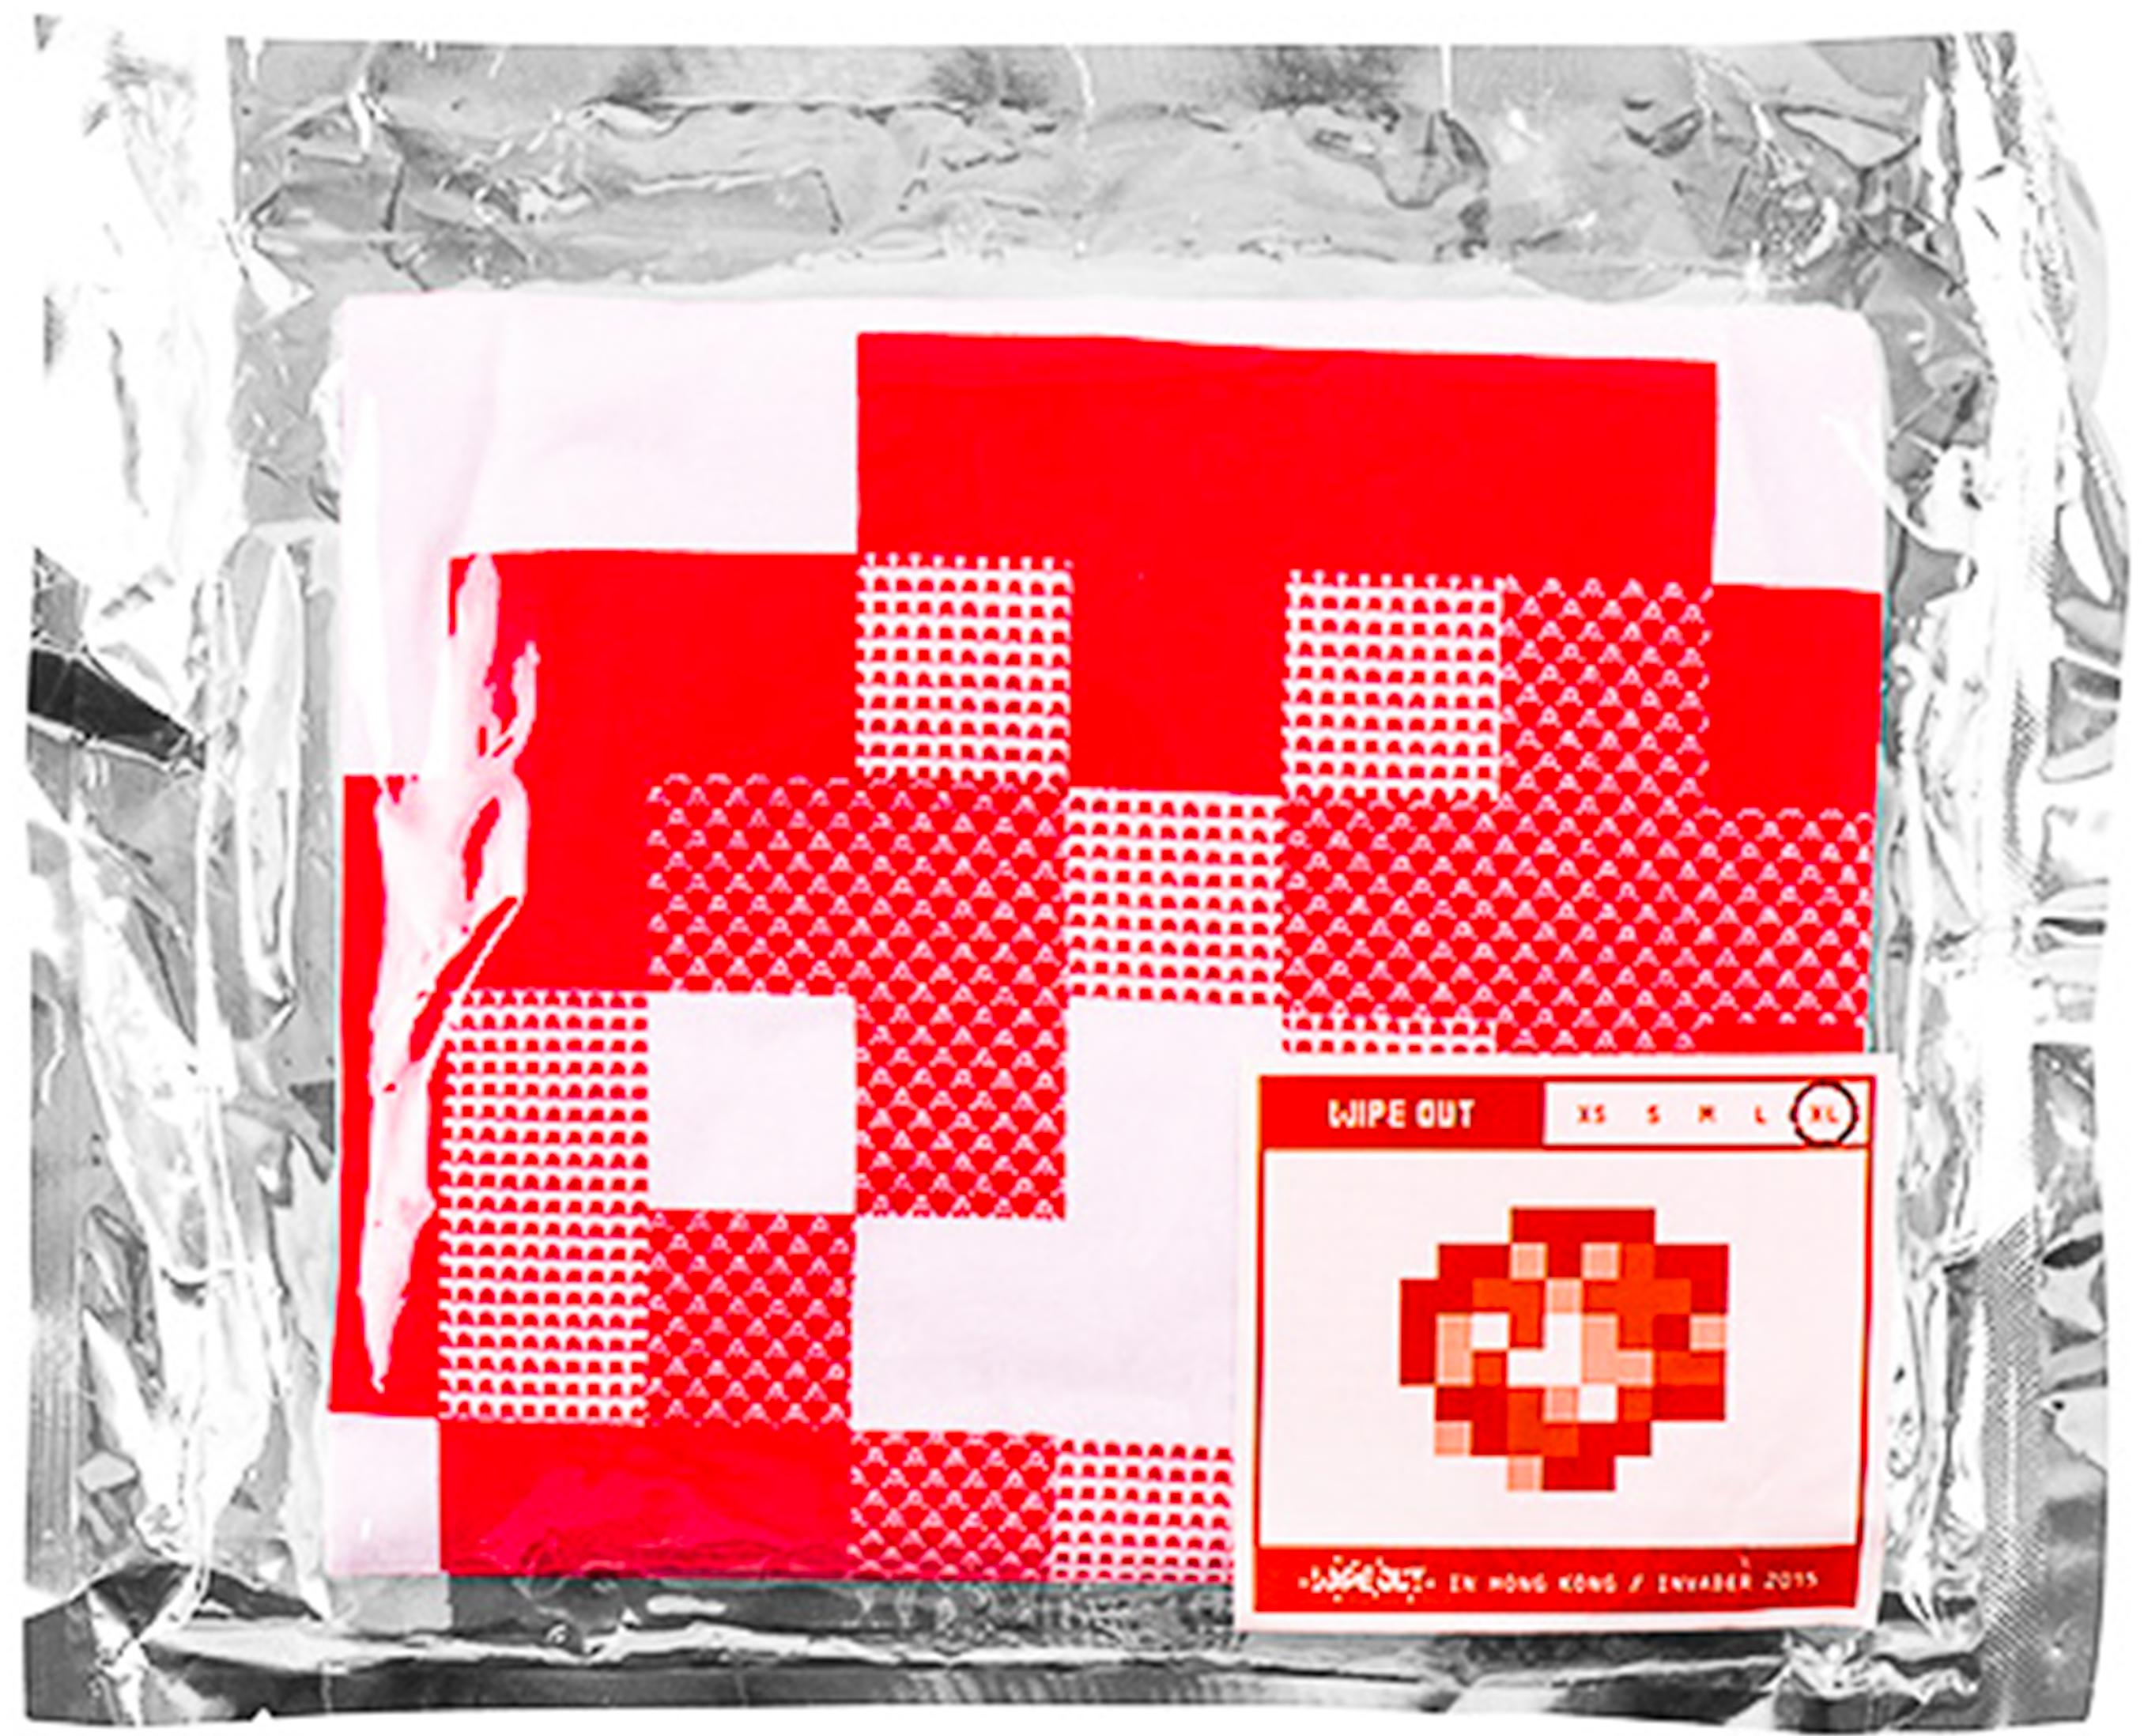 INVADER Wipe Out T-shirt (White Extra Large) - Street Art Art by Invader